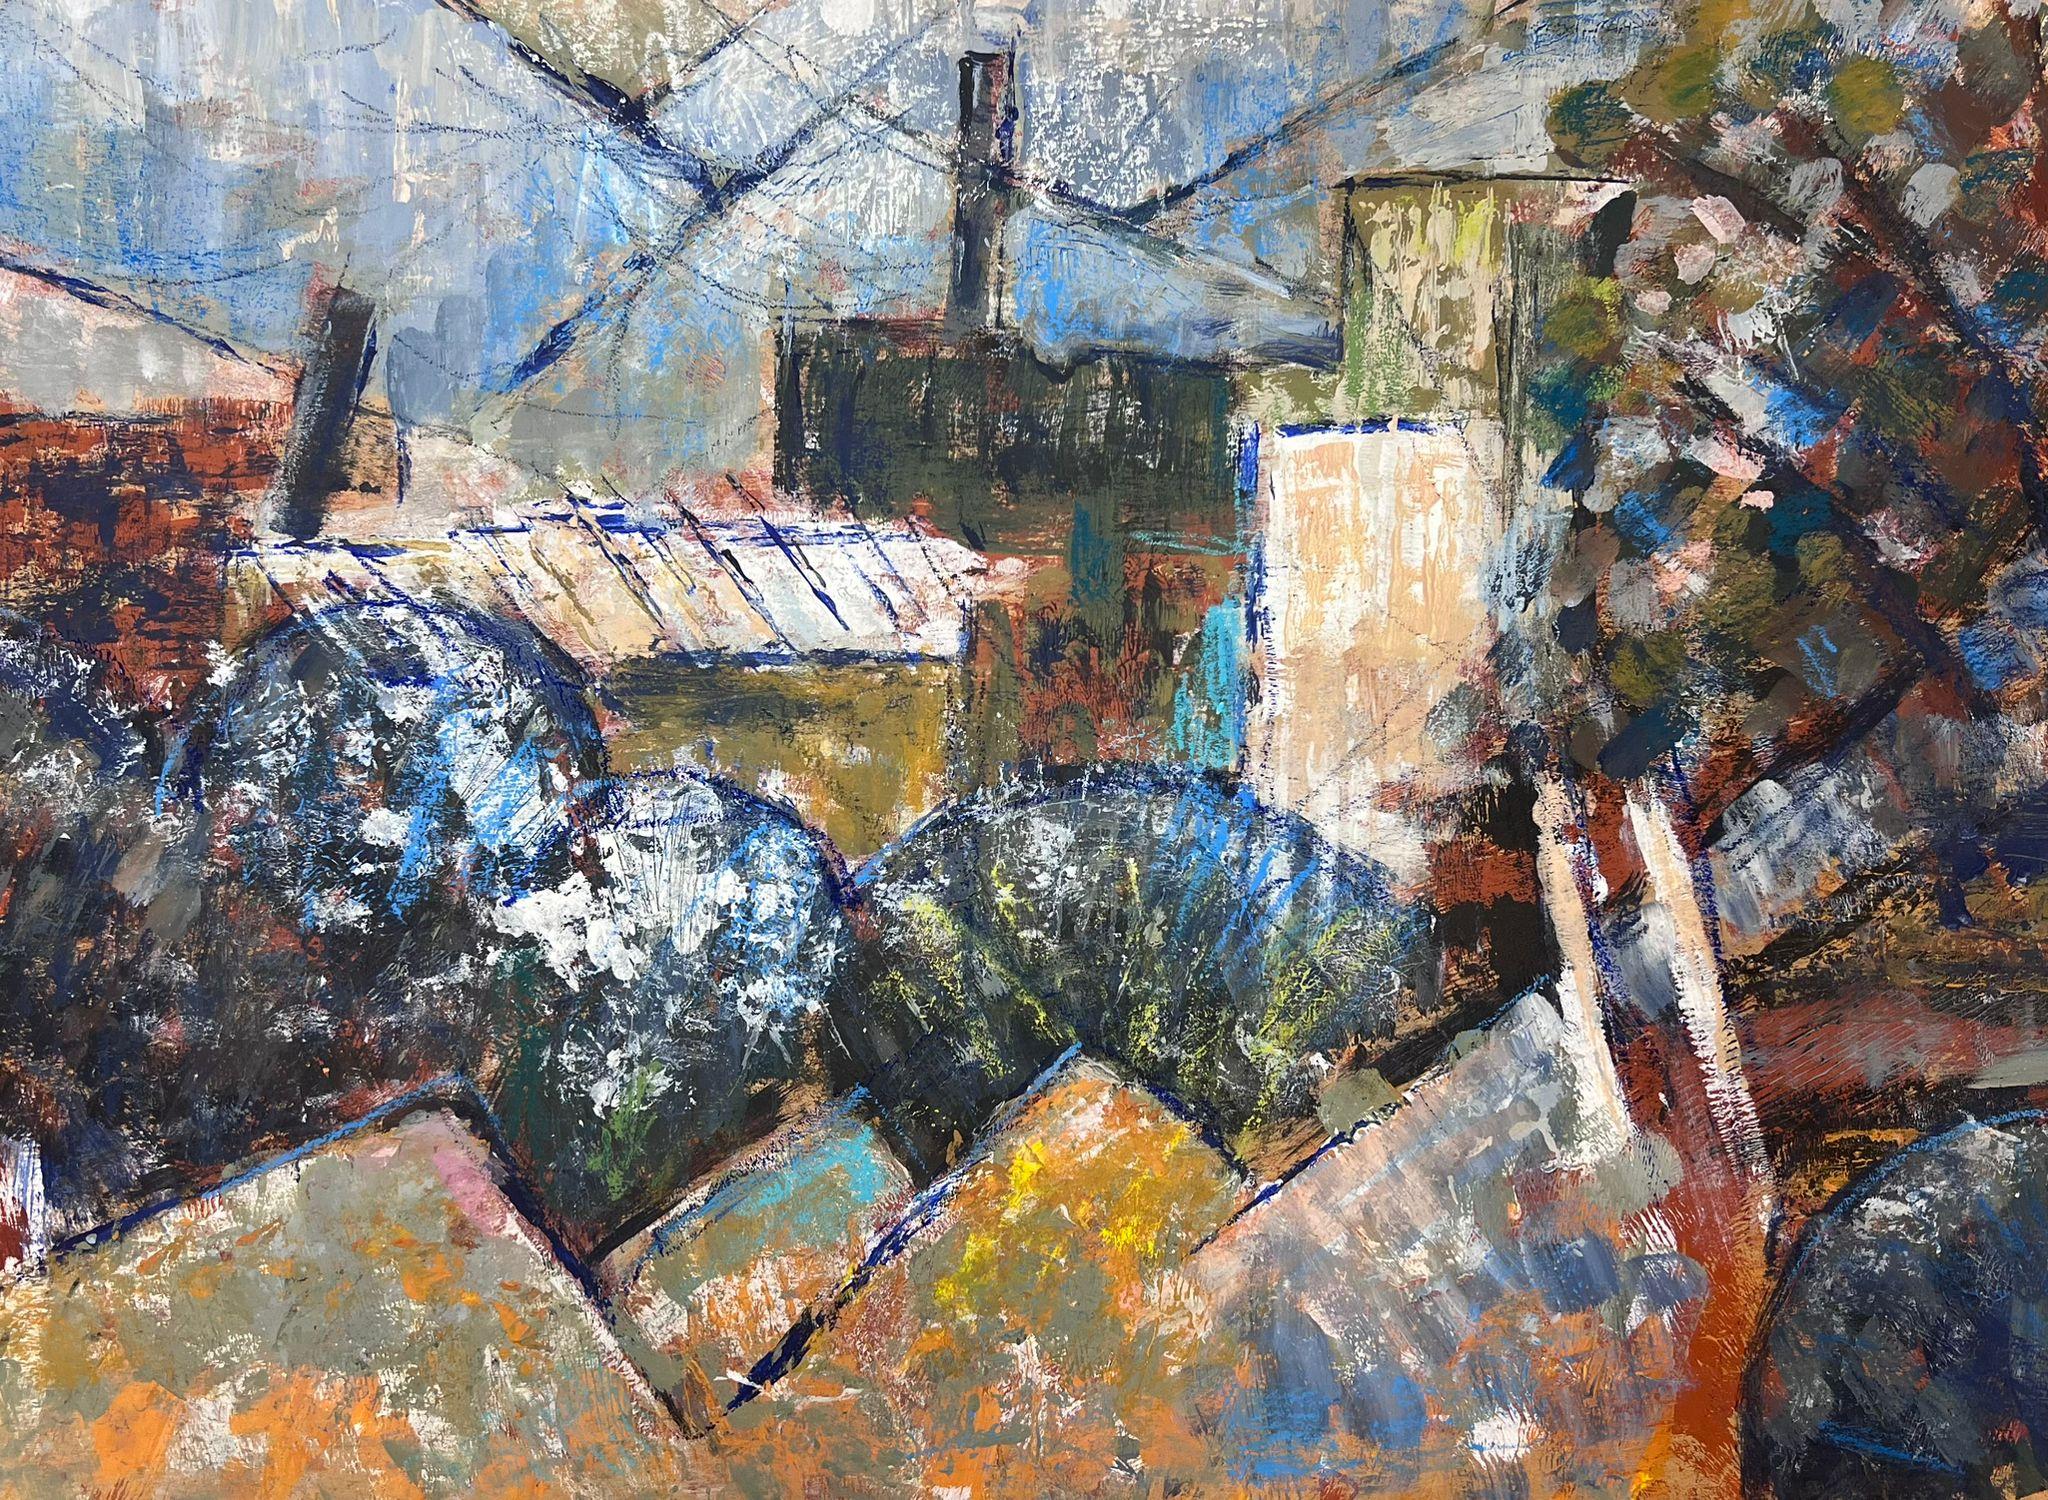 Town Abstract
by Helen Greenfield (British 20th century)
oil painting on thin board, unframed
board: 18 x 24 inches
condition: overall very good
provenance: all the paintings we have by this artist have come from their studio sale in England

Helen